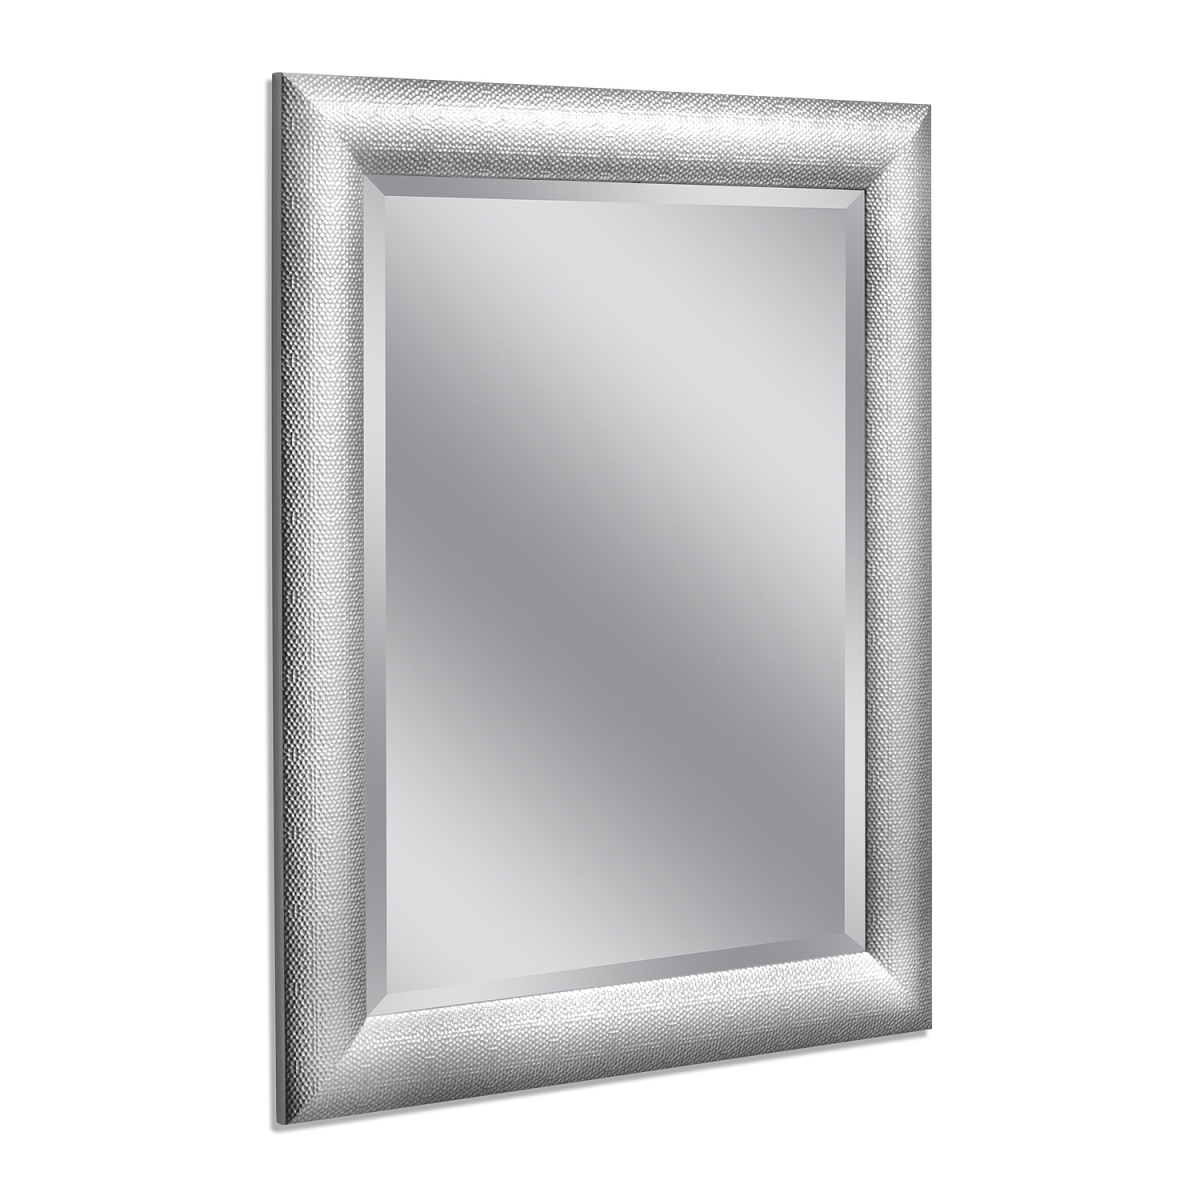 Head West 8115 28 X 34 In. Hammered Wall Mirror Chrome